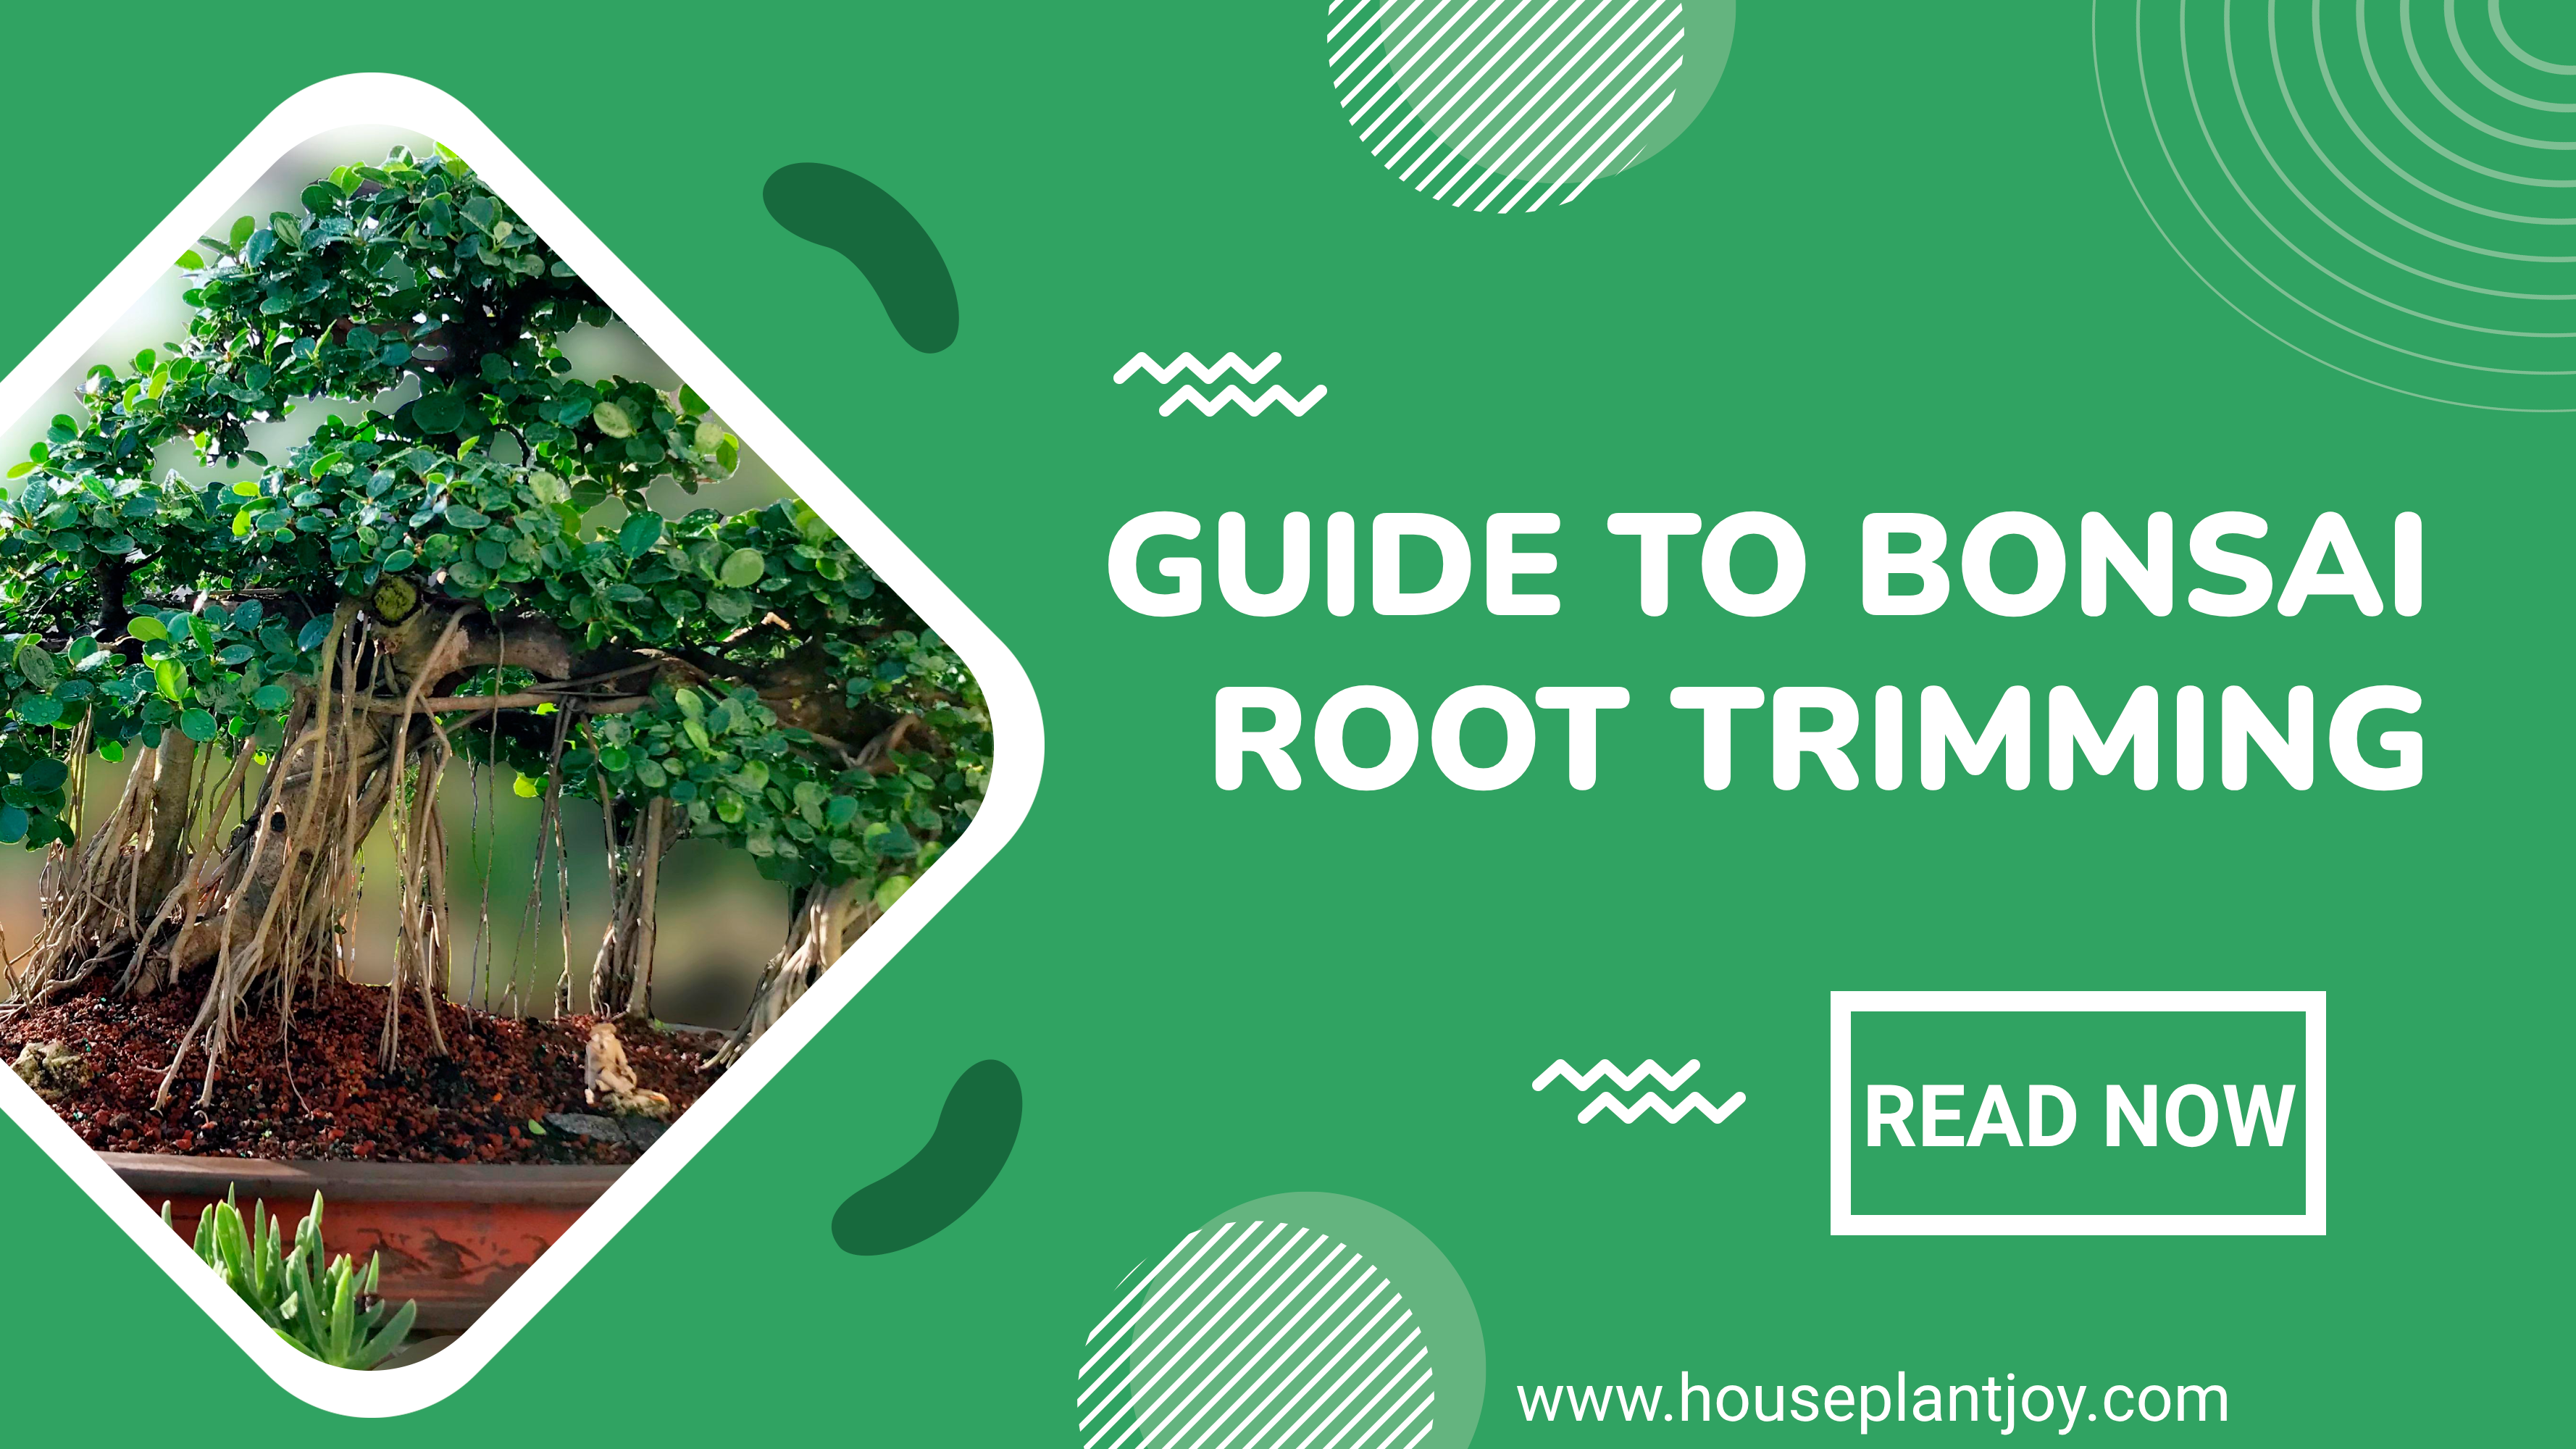 Guide to Bonsai Root Trimming